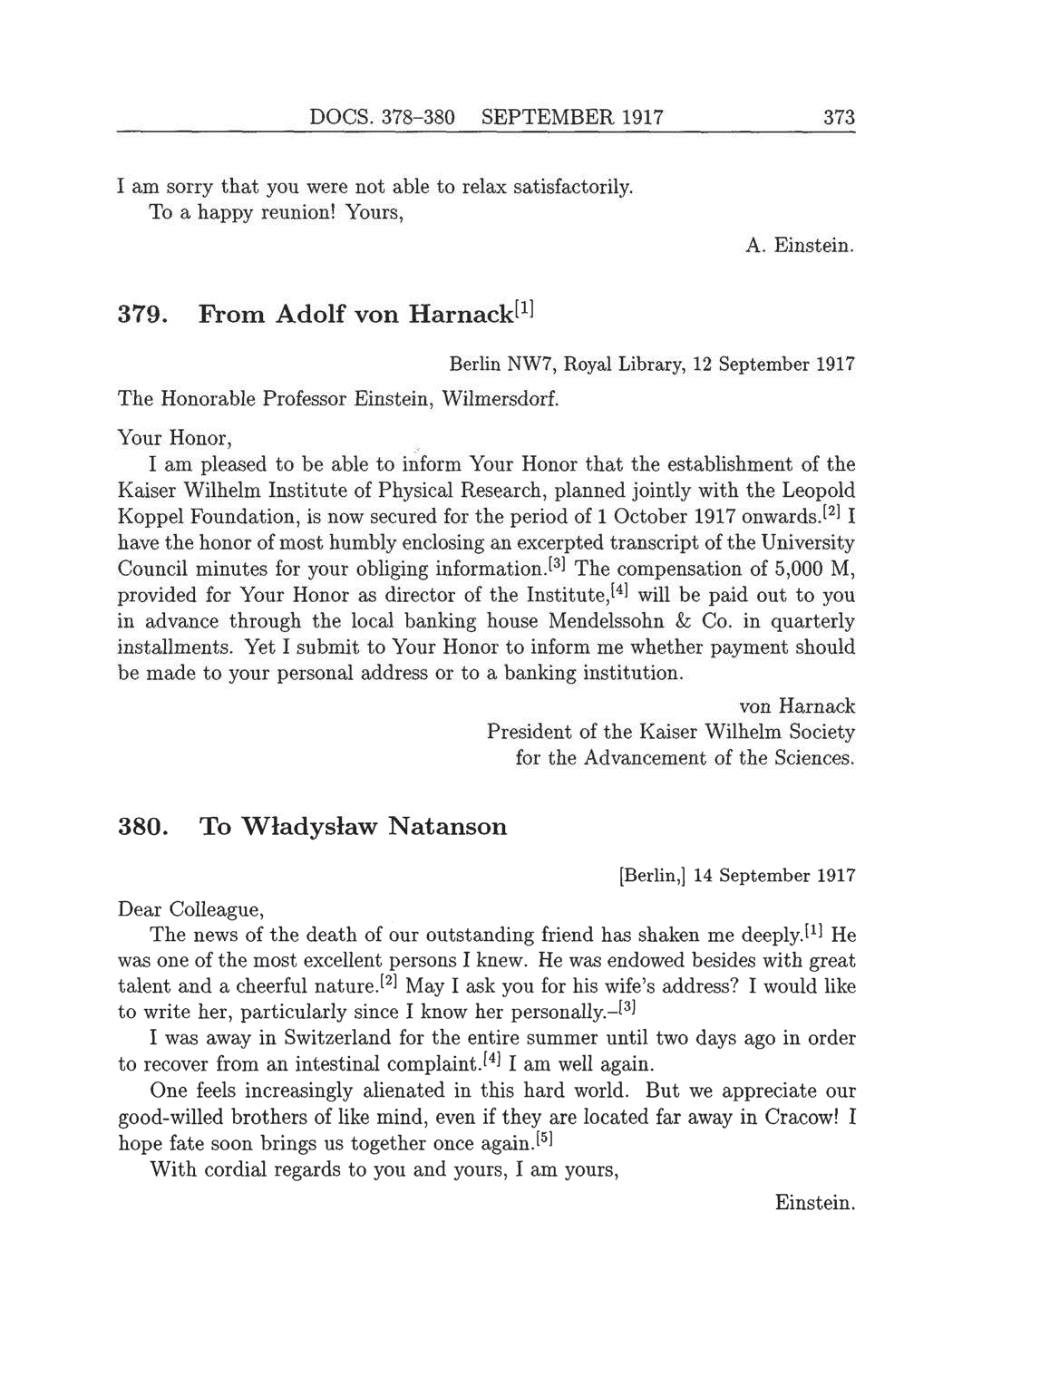 Volume 8: The Berlin Years: Correspondence, 1914-1918 (English translation supplement) page 373